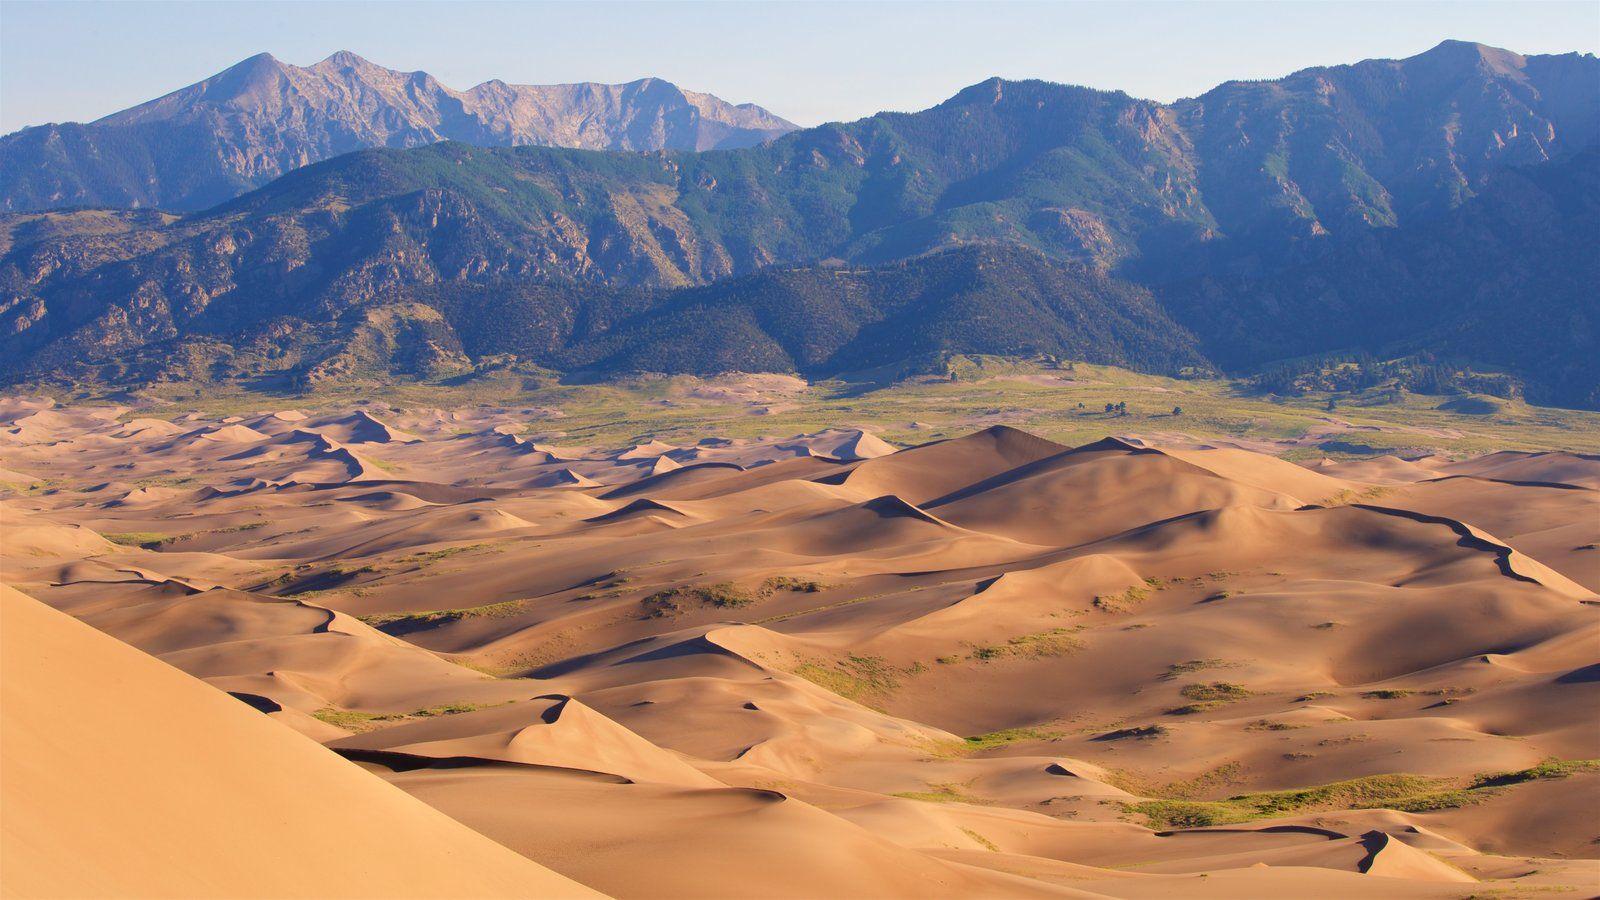 Mountain Pictures View Wallpaper of Great Sand Dunes National Park